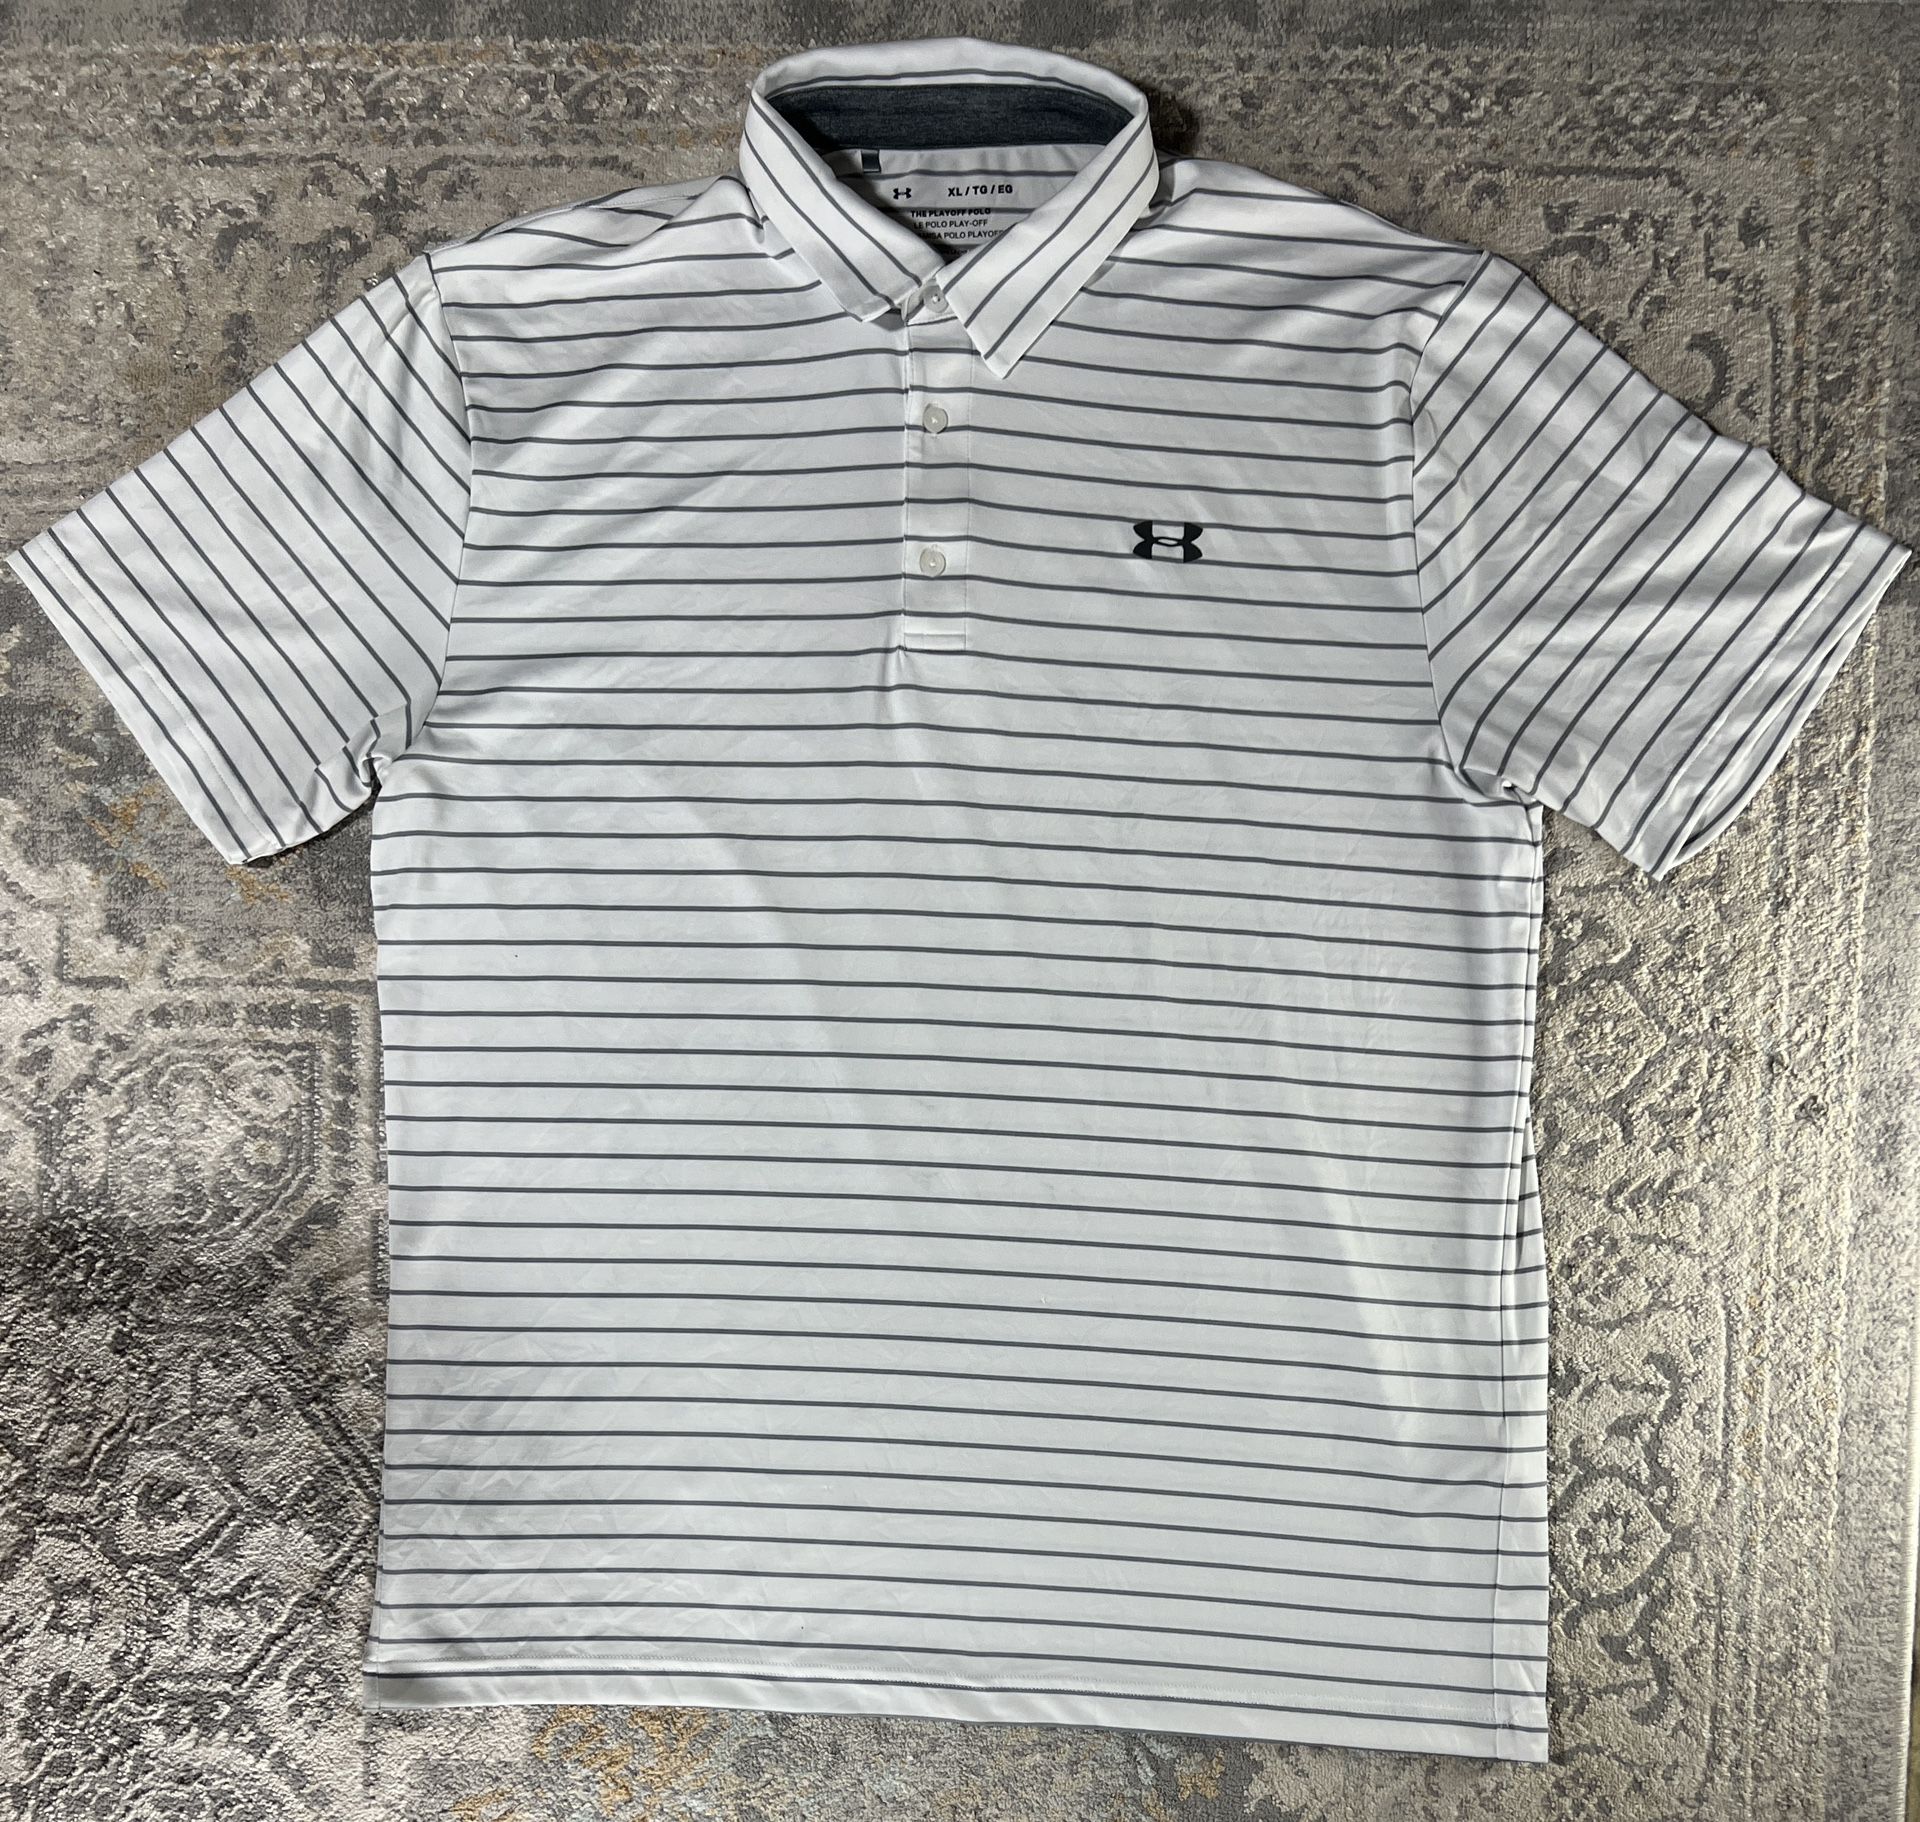 Under Armour The Playoff Golf Polo Shirt White Gray Striped Men's Size XL